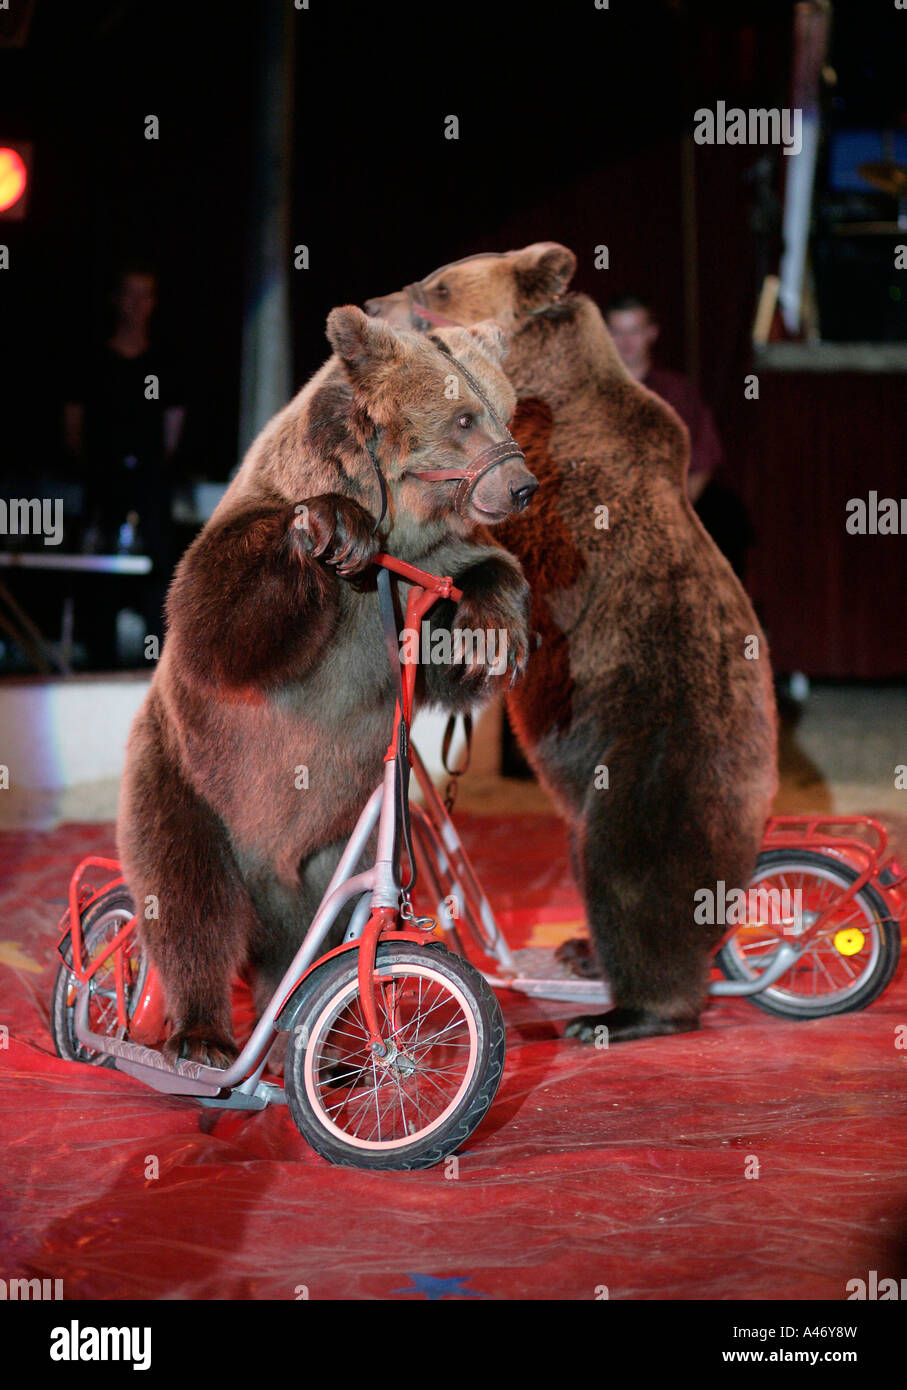 Two brown bears (Ursus arctos) on scooters in the cricus Renz. Stock Photo